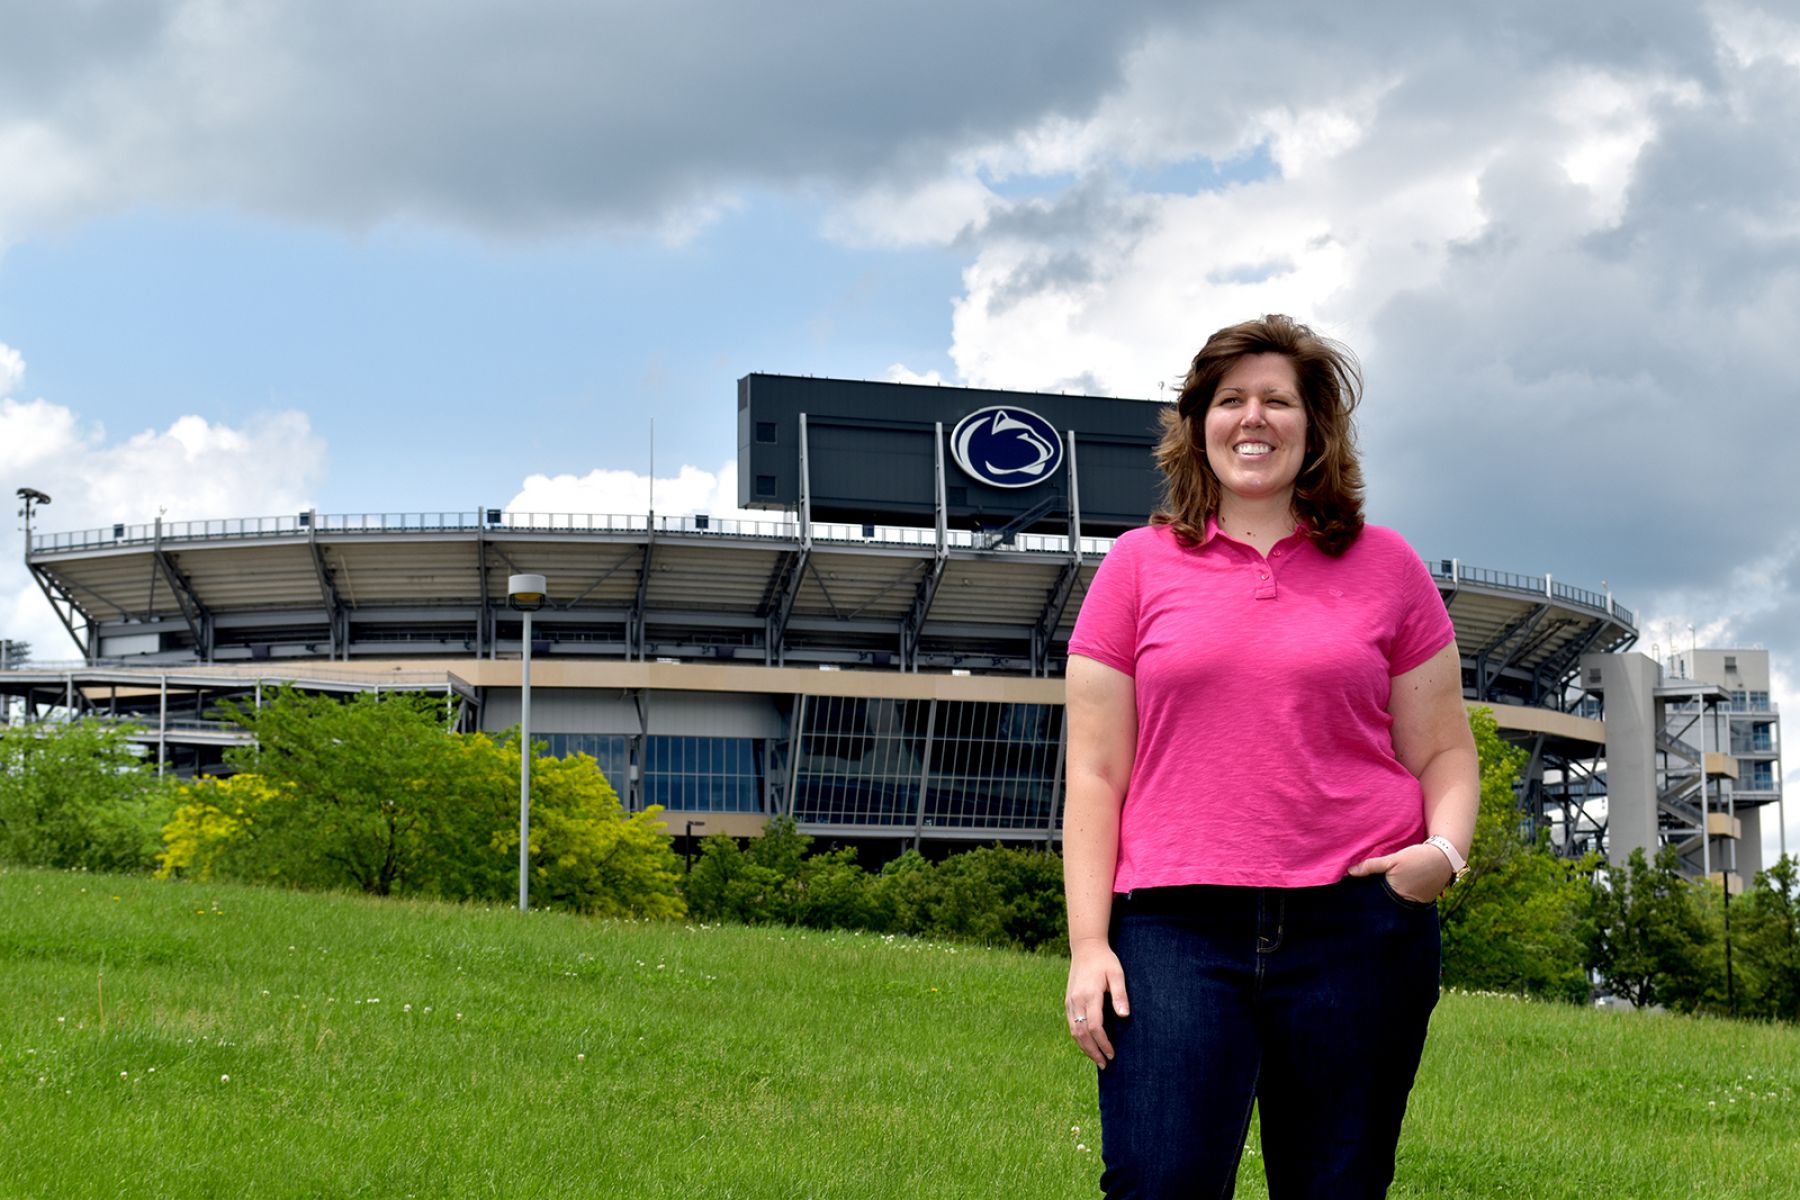 Audrey Snyder outside Beaver Stadium on a bright sunny day